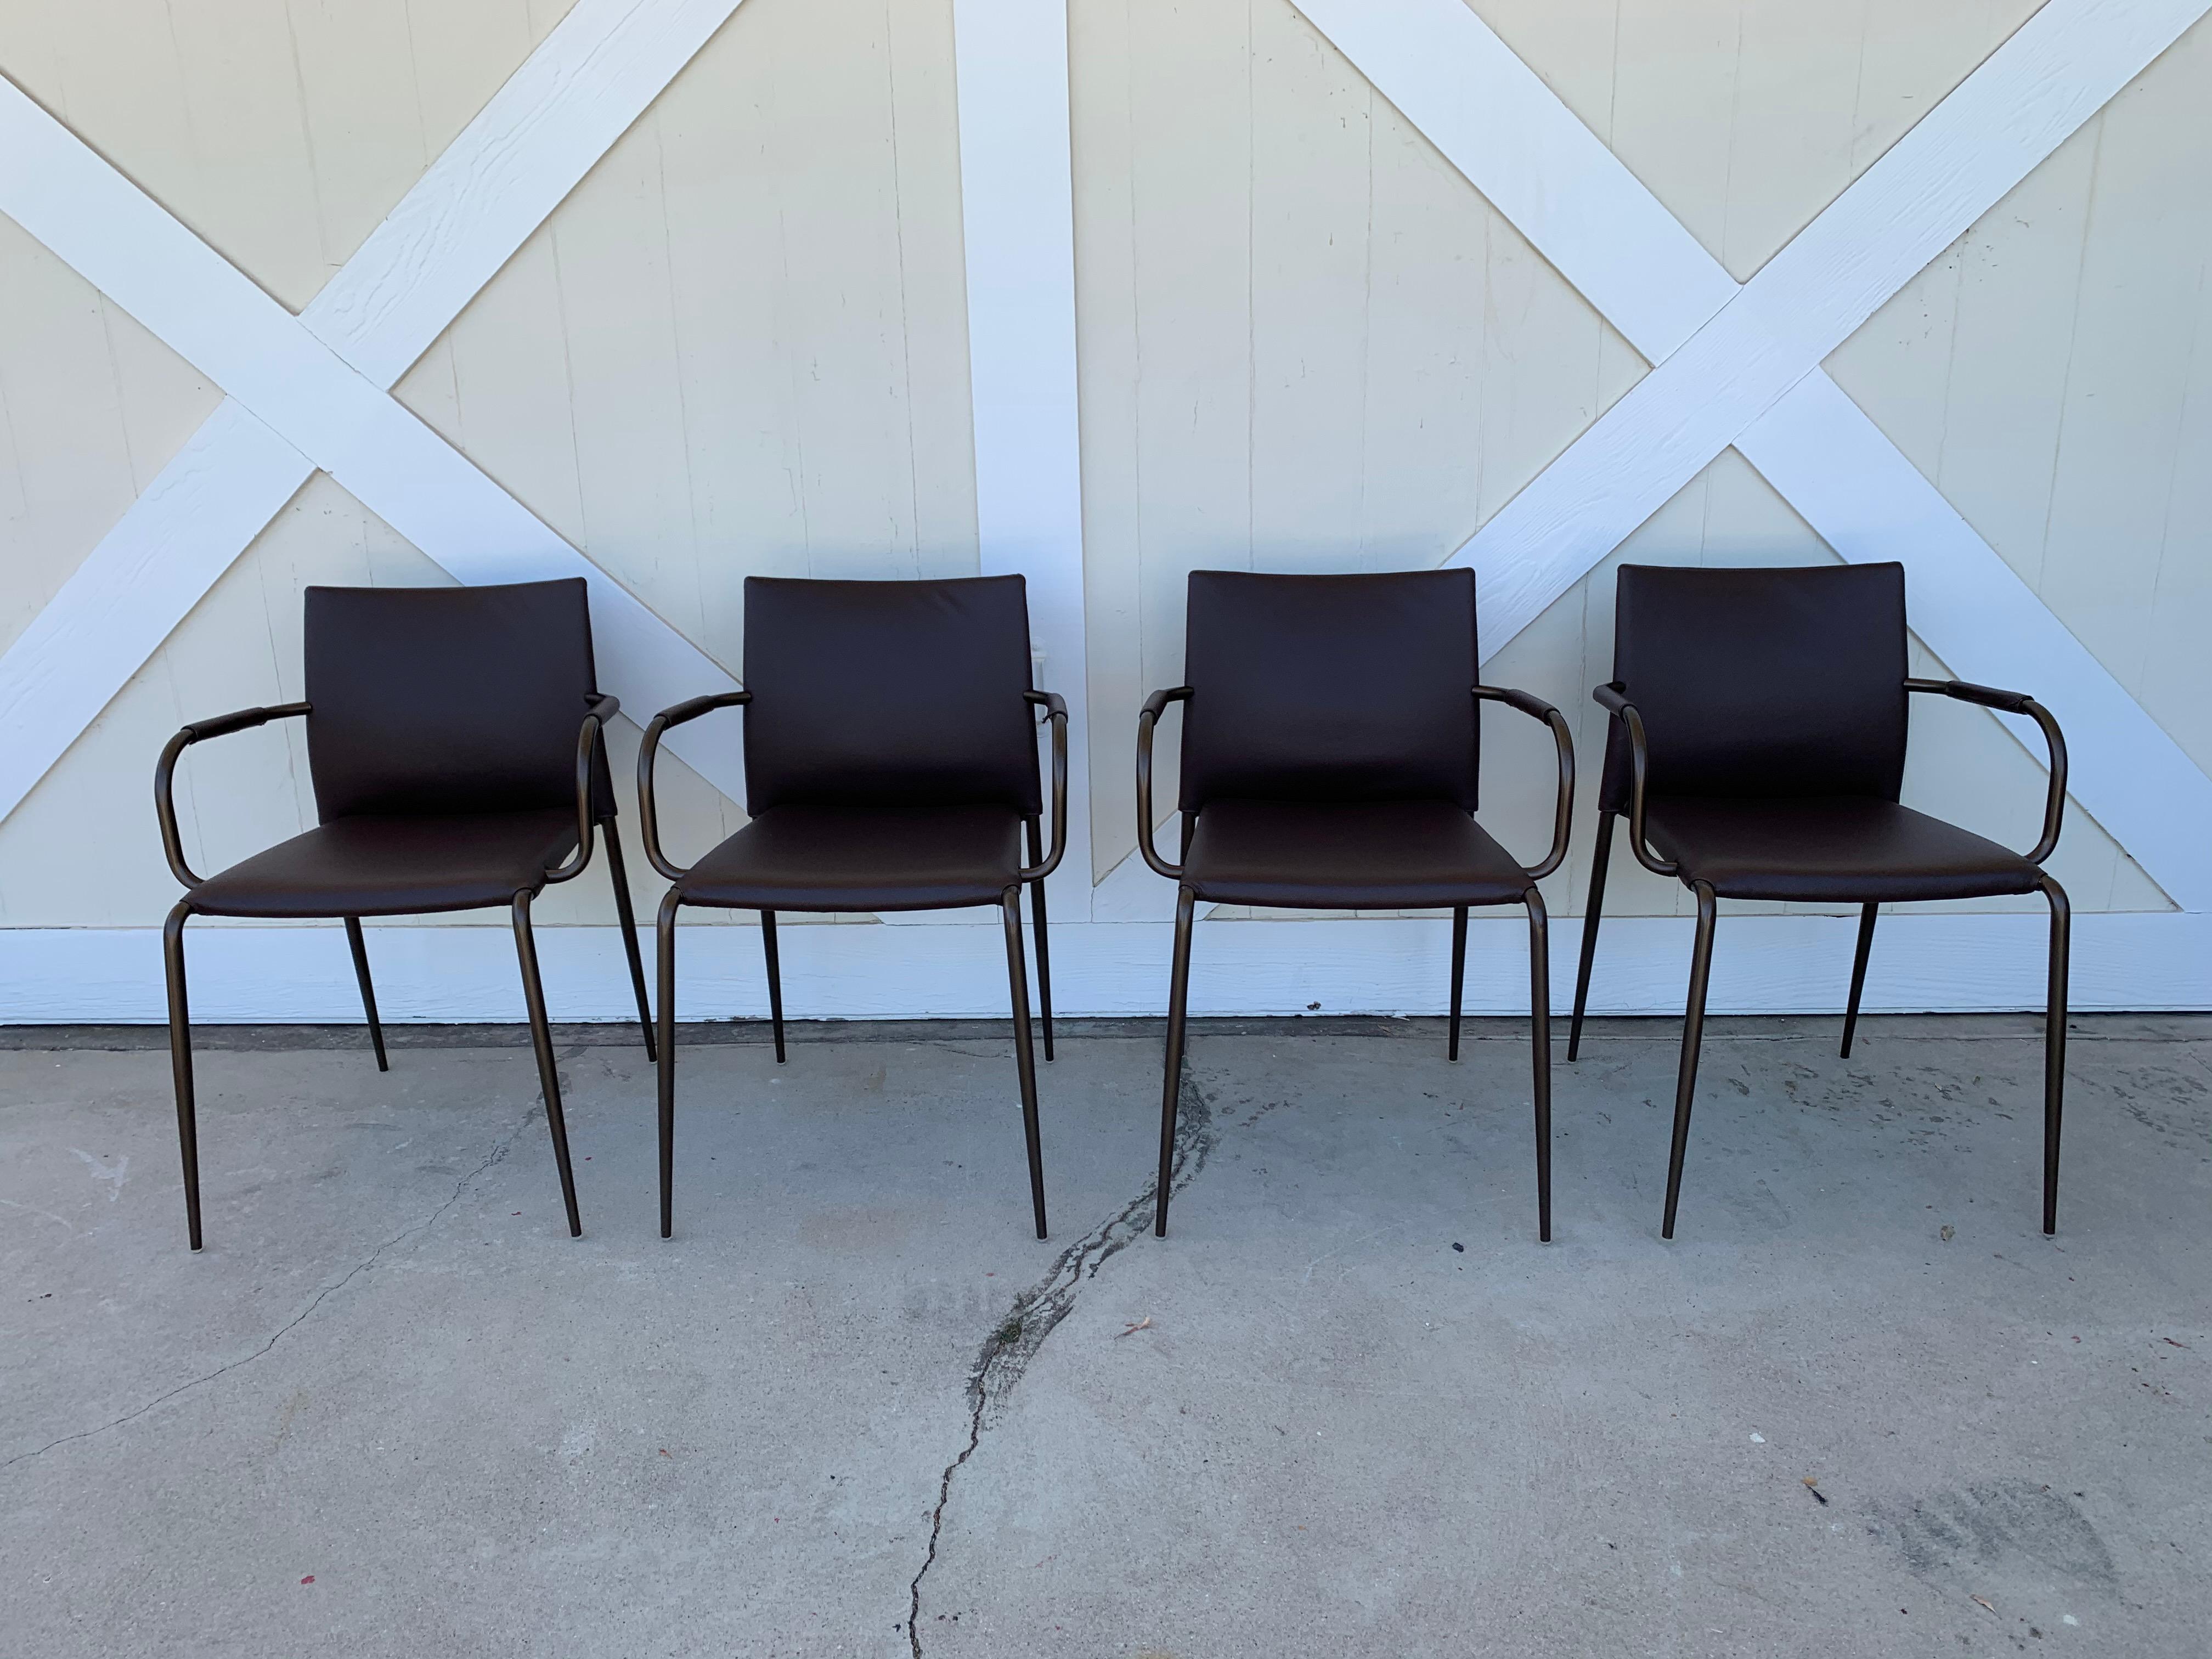 Set of 6 Gazzella armchairs designed by Tom Kelley and manufactured in Italy by Enrico Pellizzoni.

This armchair is characterized by Minimalist, simple lines synonymous with great elegance. It's stackable and suitable for all contexts, from